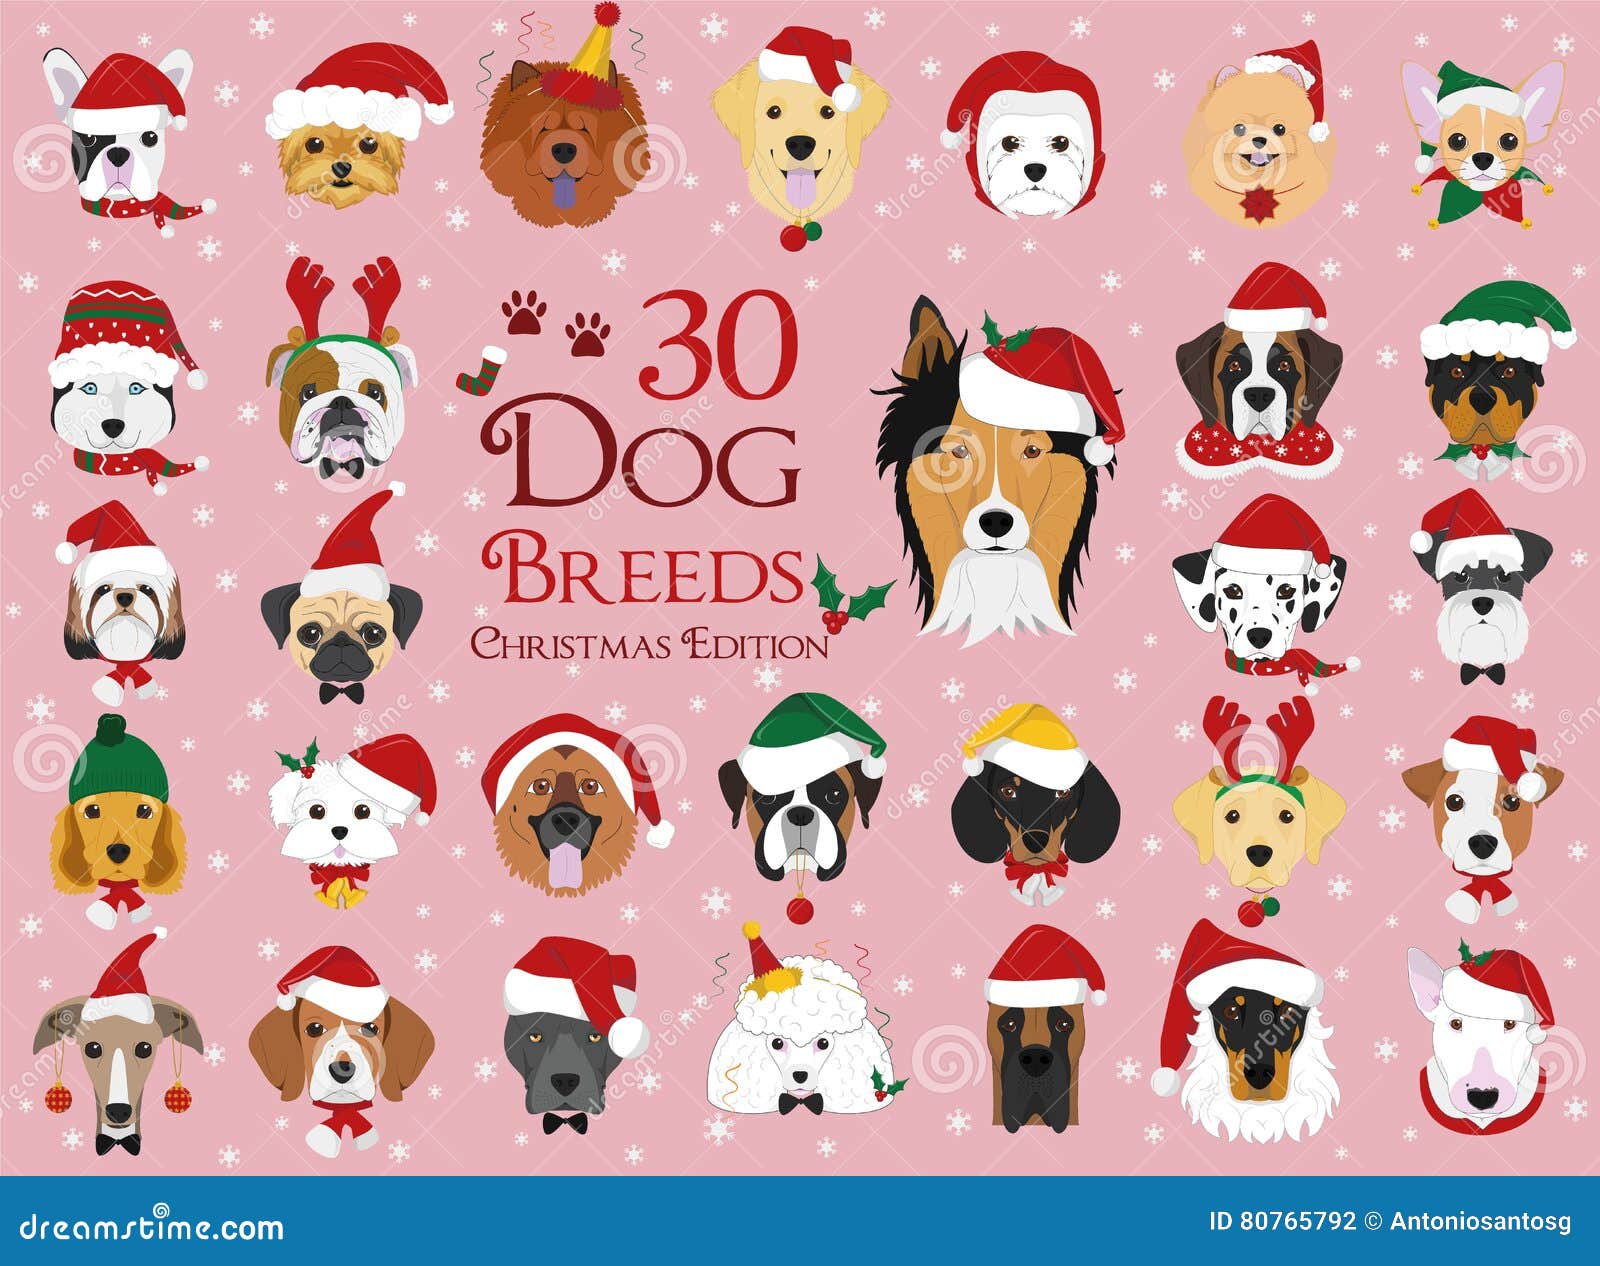 set of 30 dog breeds with christmas and winter themes